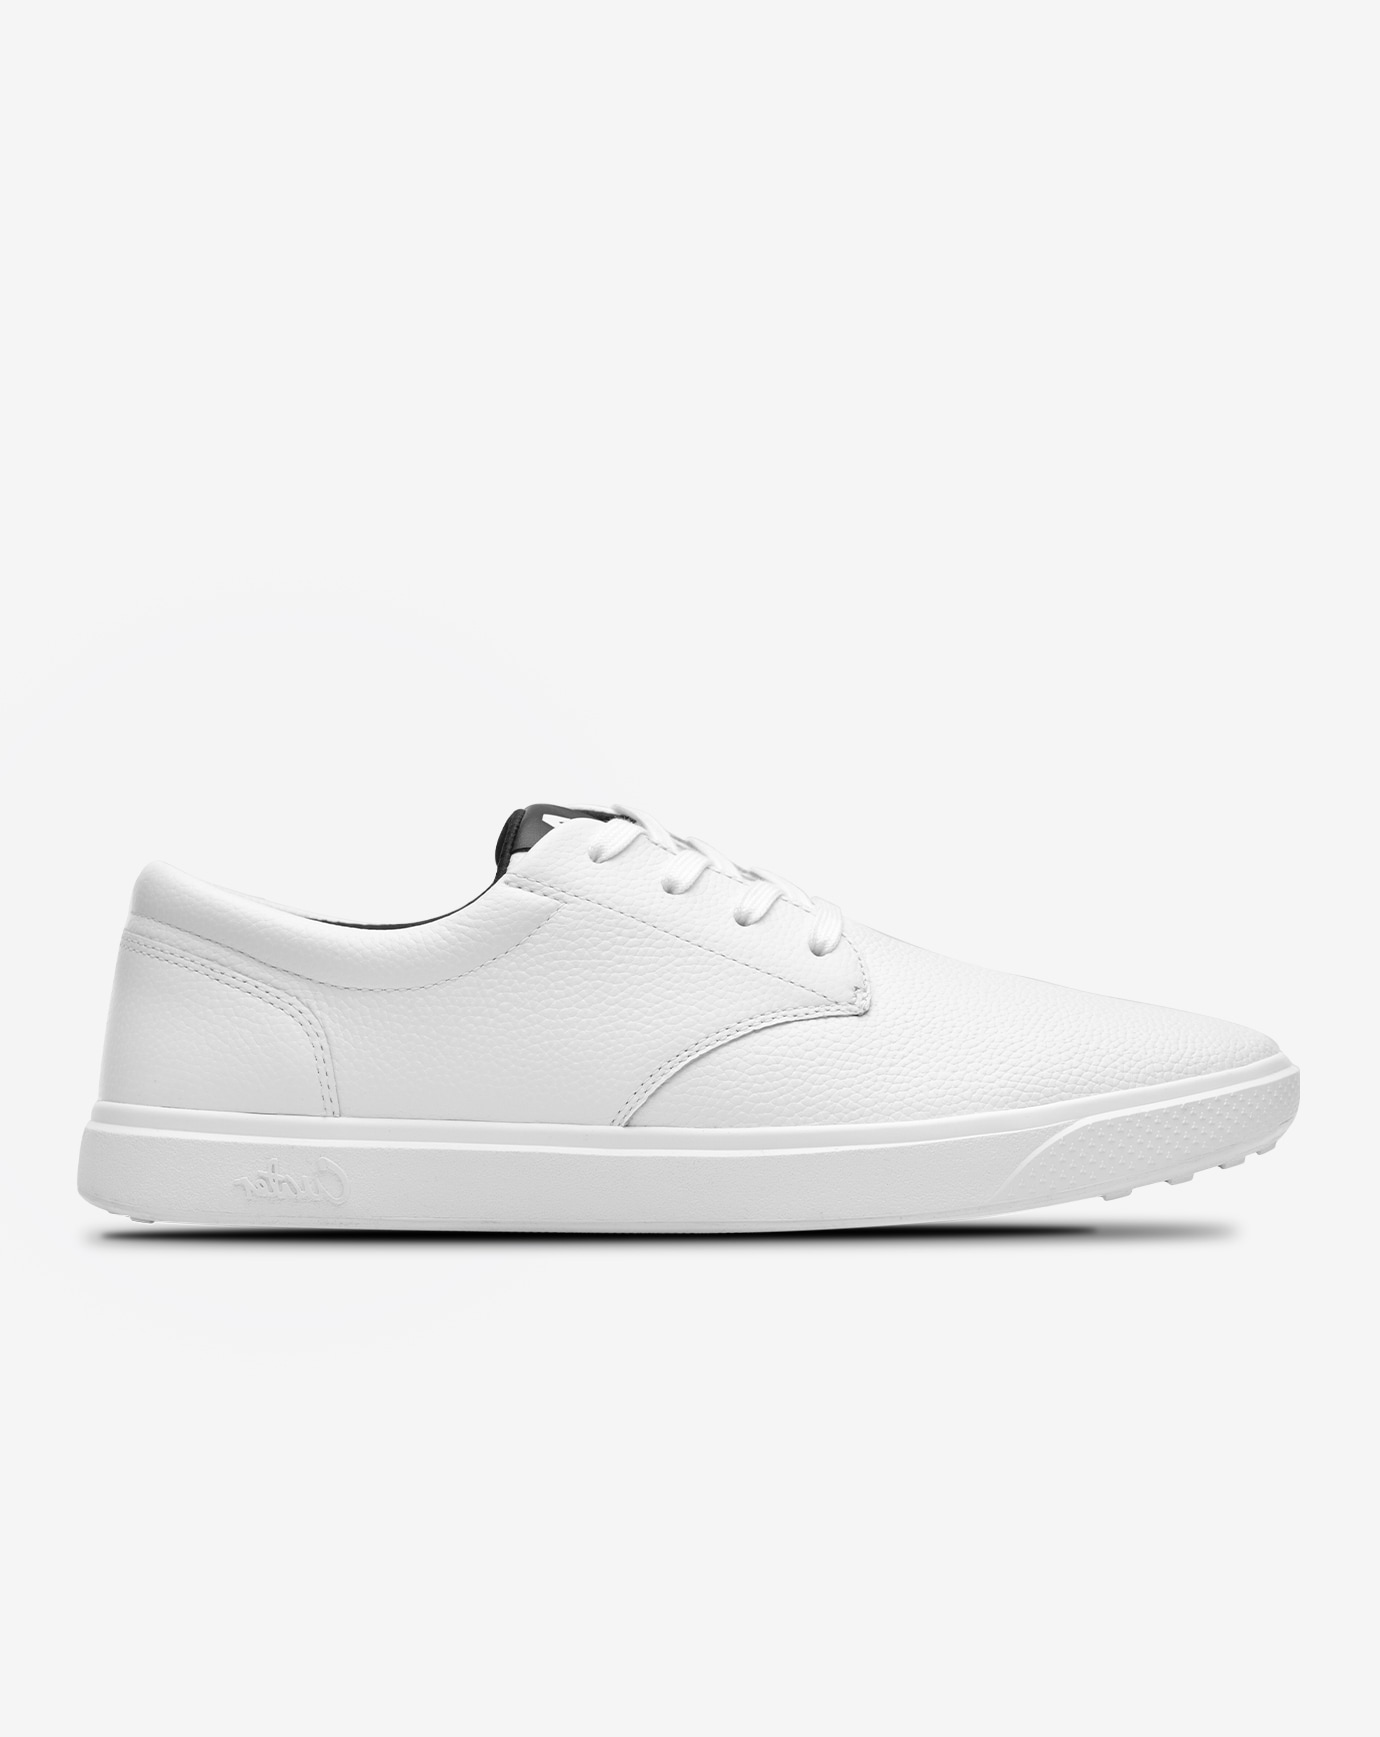 THE WILDCARD LEATHER SPIKELESS GOLF SHOE Image Thumbnail 3